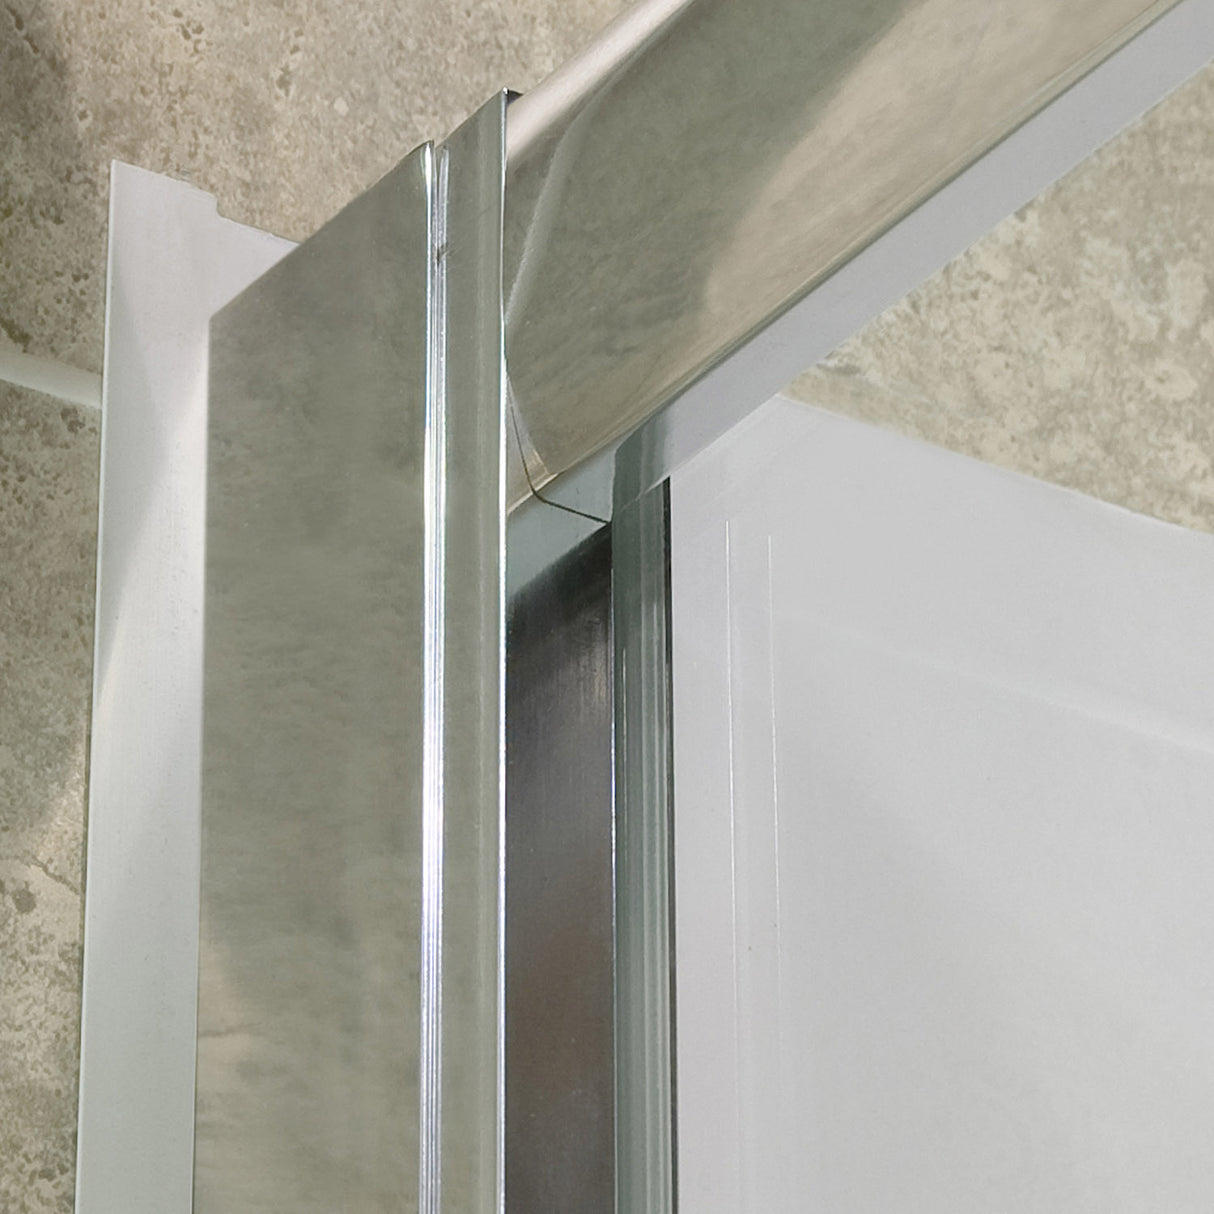 DreamLine Visions 30 in. D x 60 in. W x 74 3/4 in. H Sliding Shower Door in Chrome with Right Drain Biscuit Shower Base